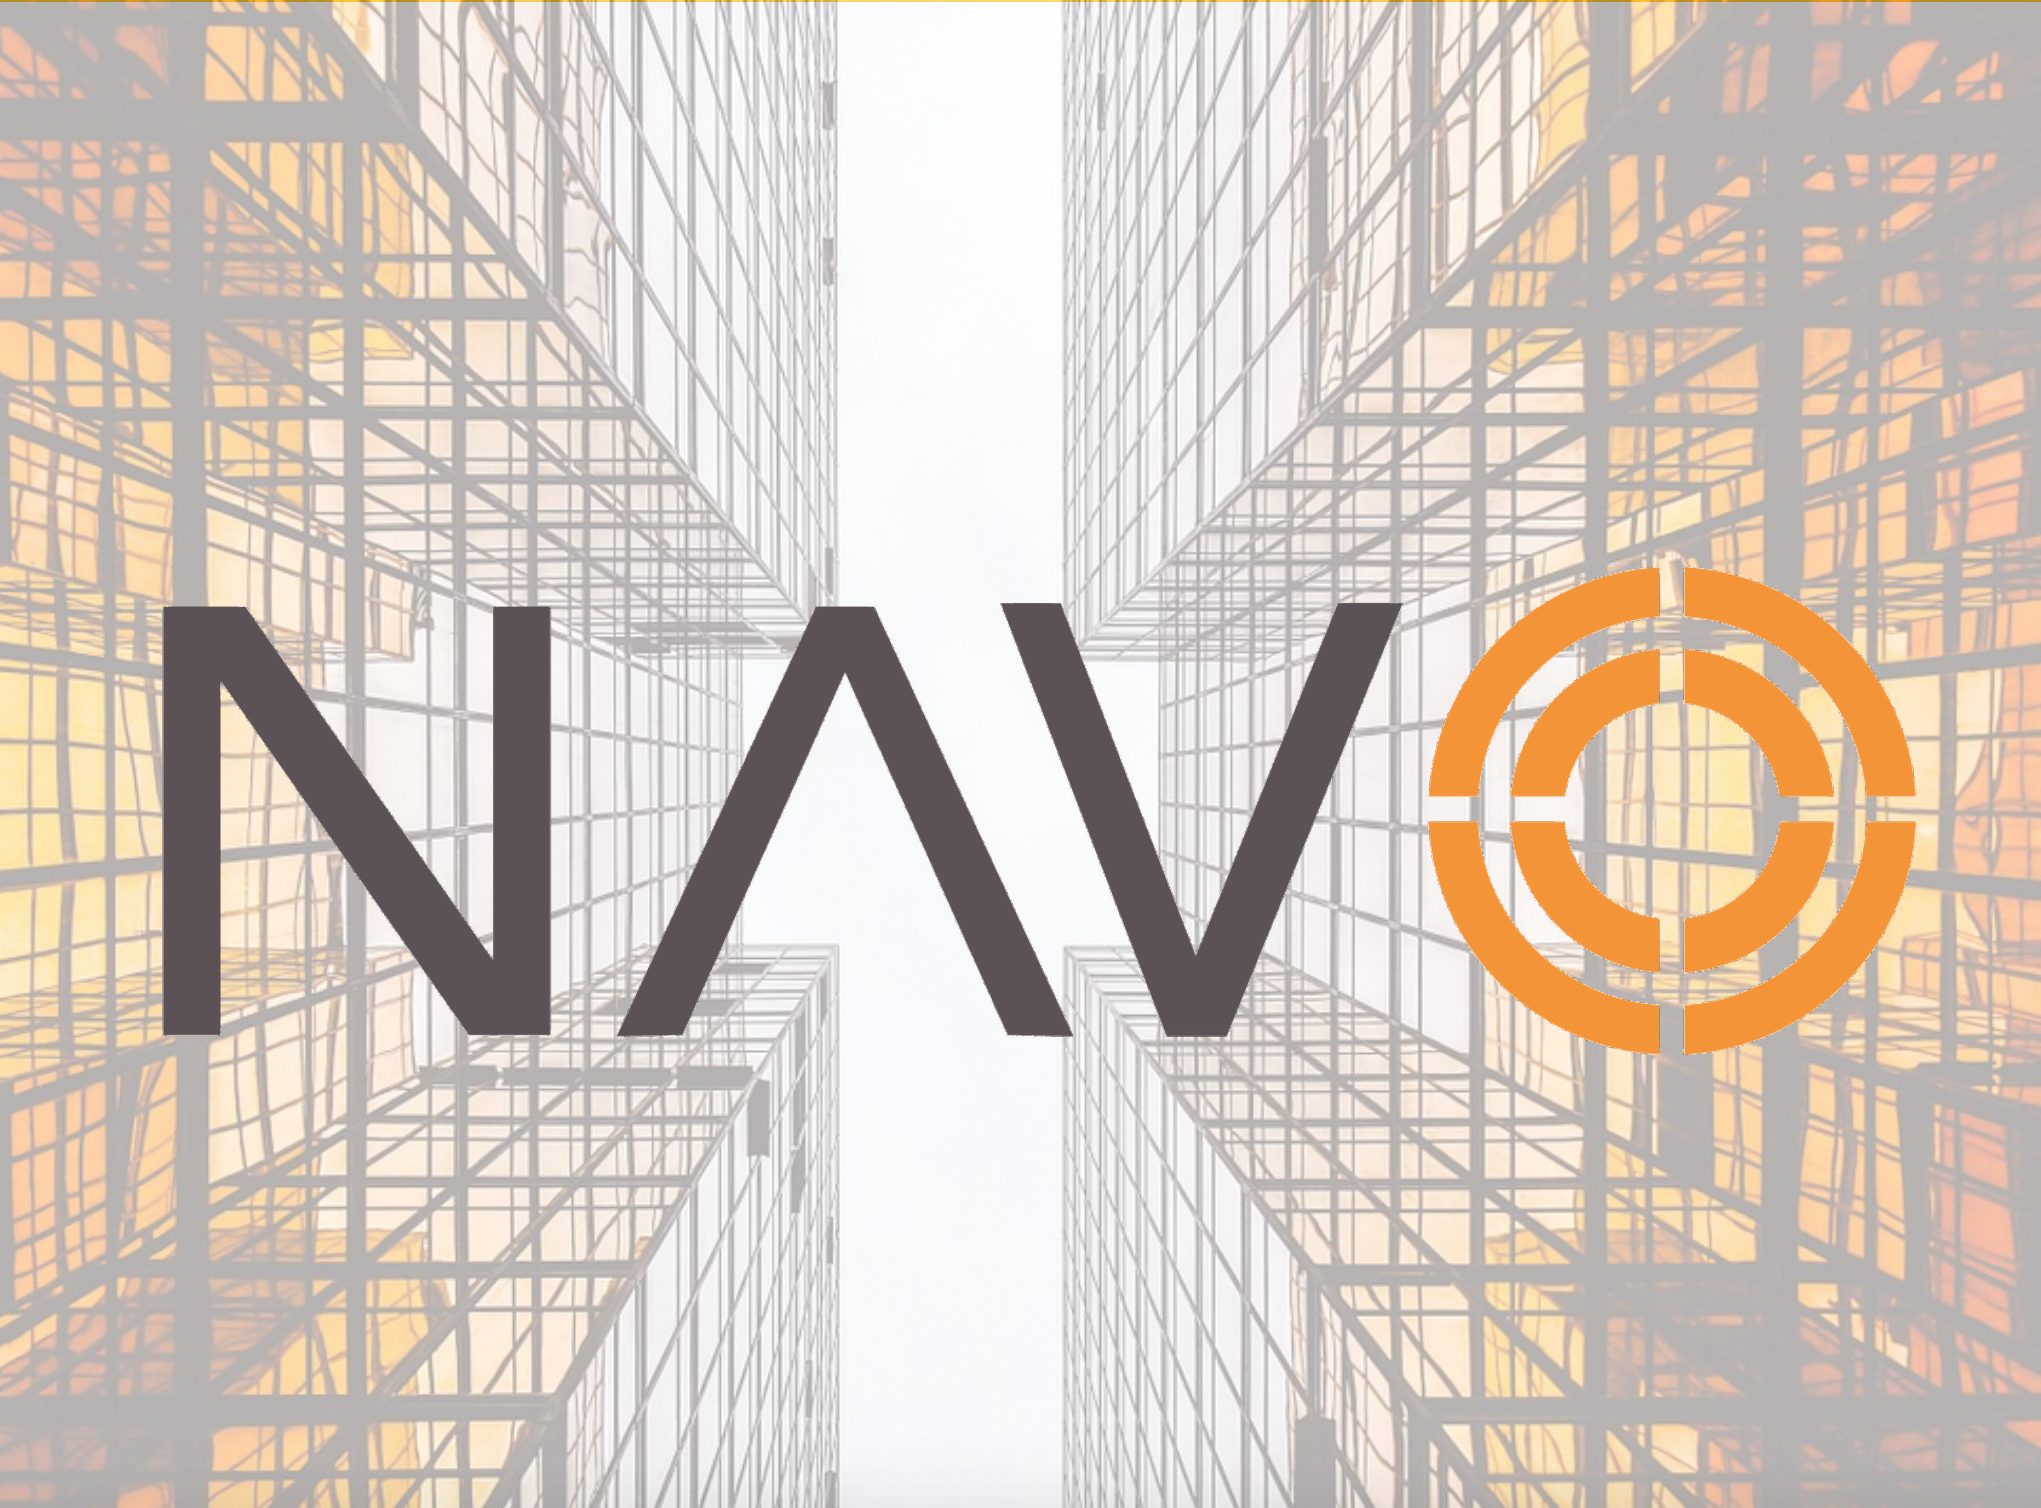 Co-founder and Developer for Navo